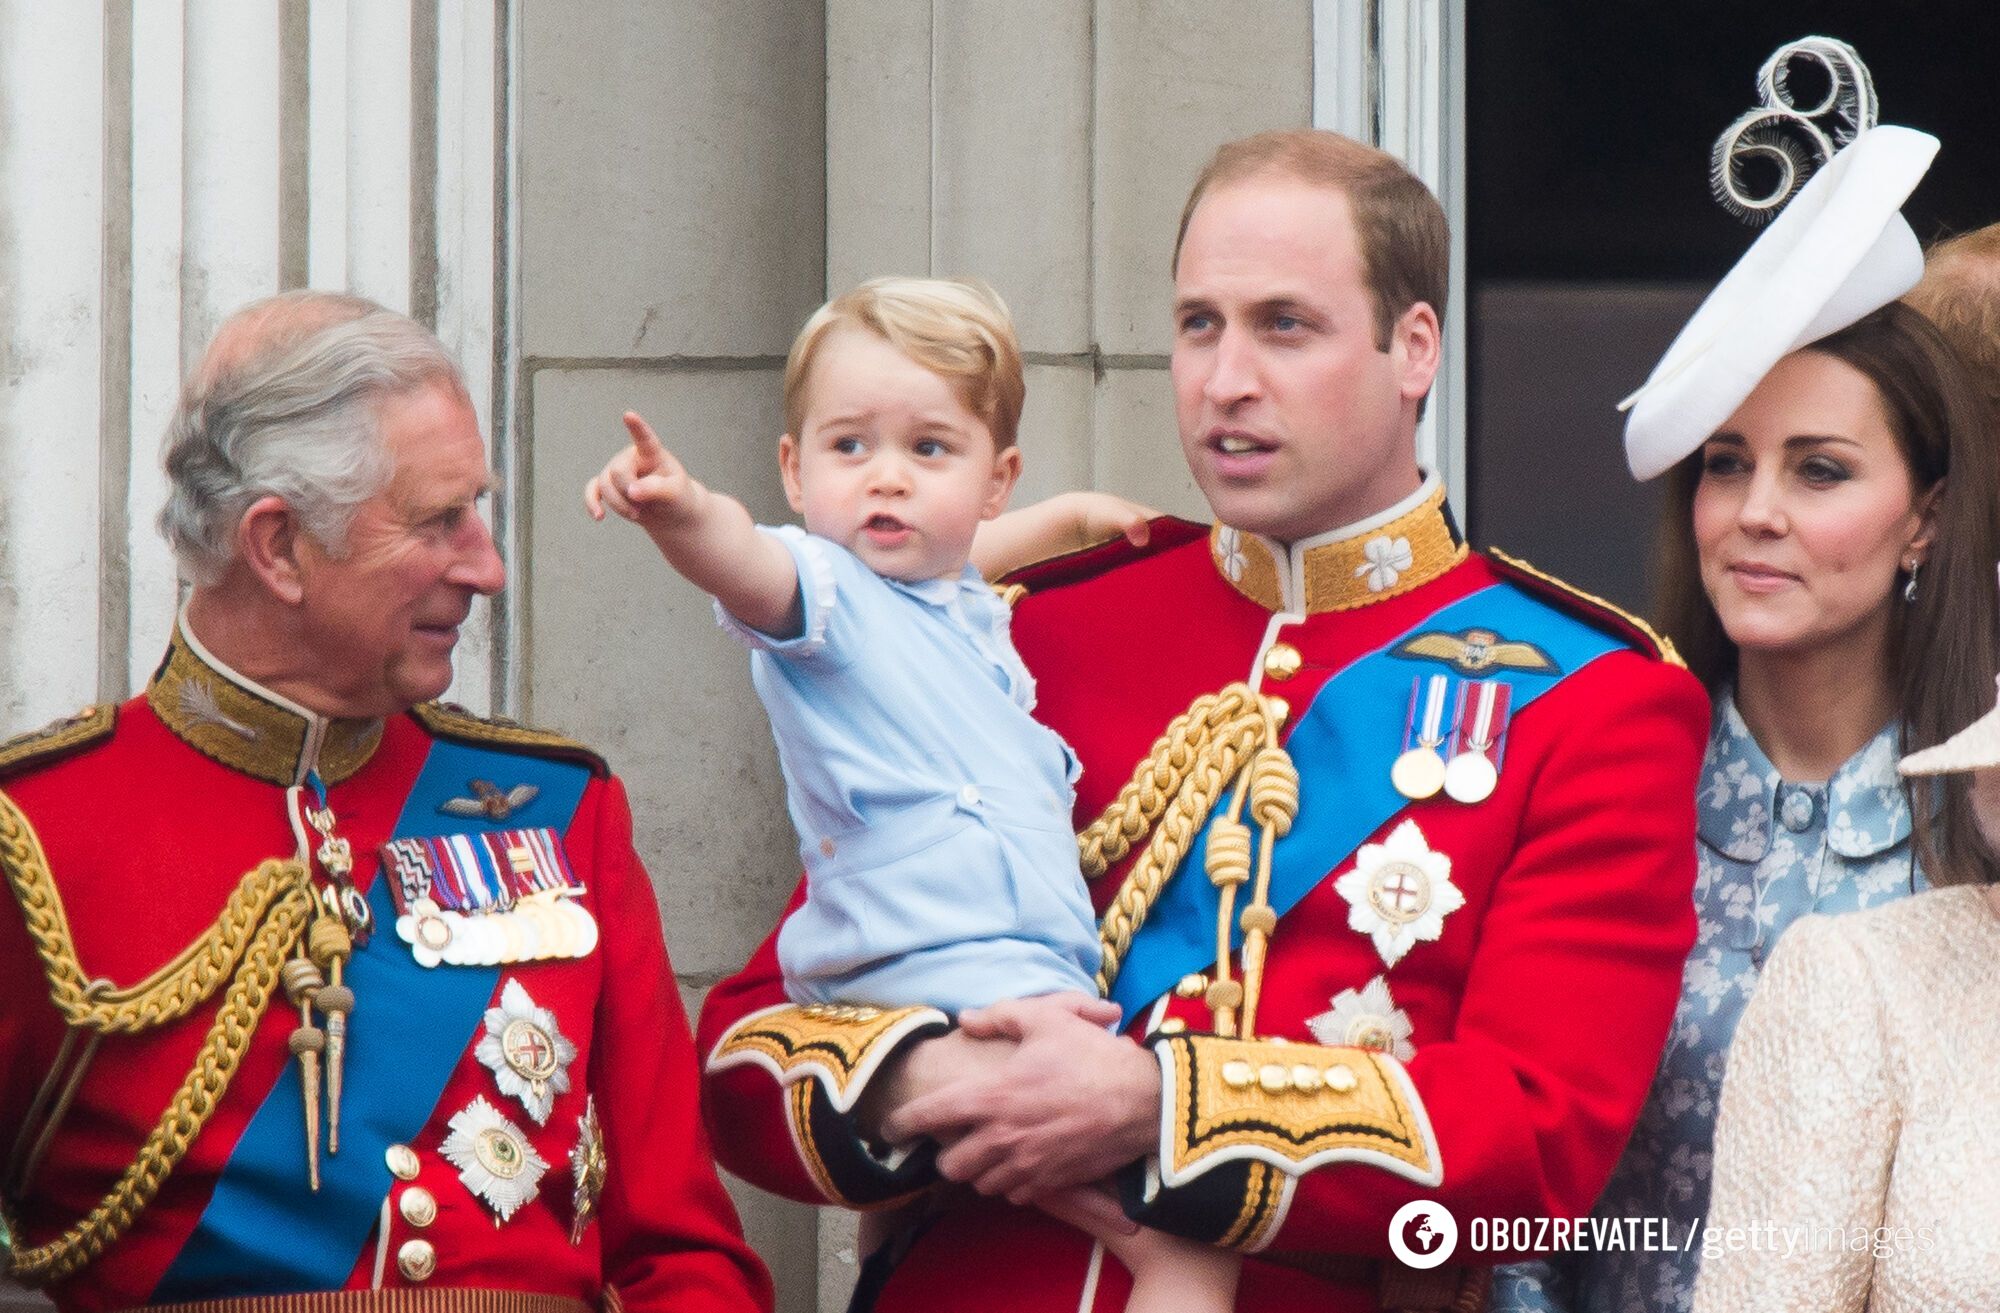 He loves to give them gifts and play with them: here is why King Charles III is a great grandfather